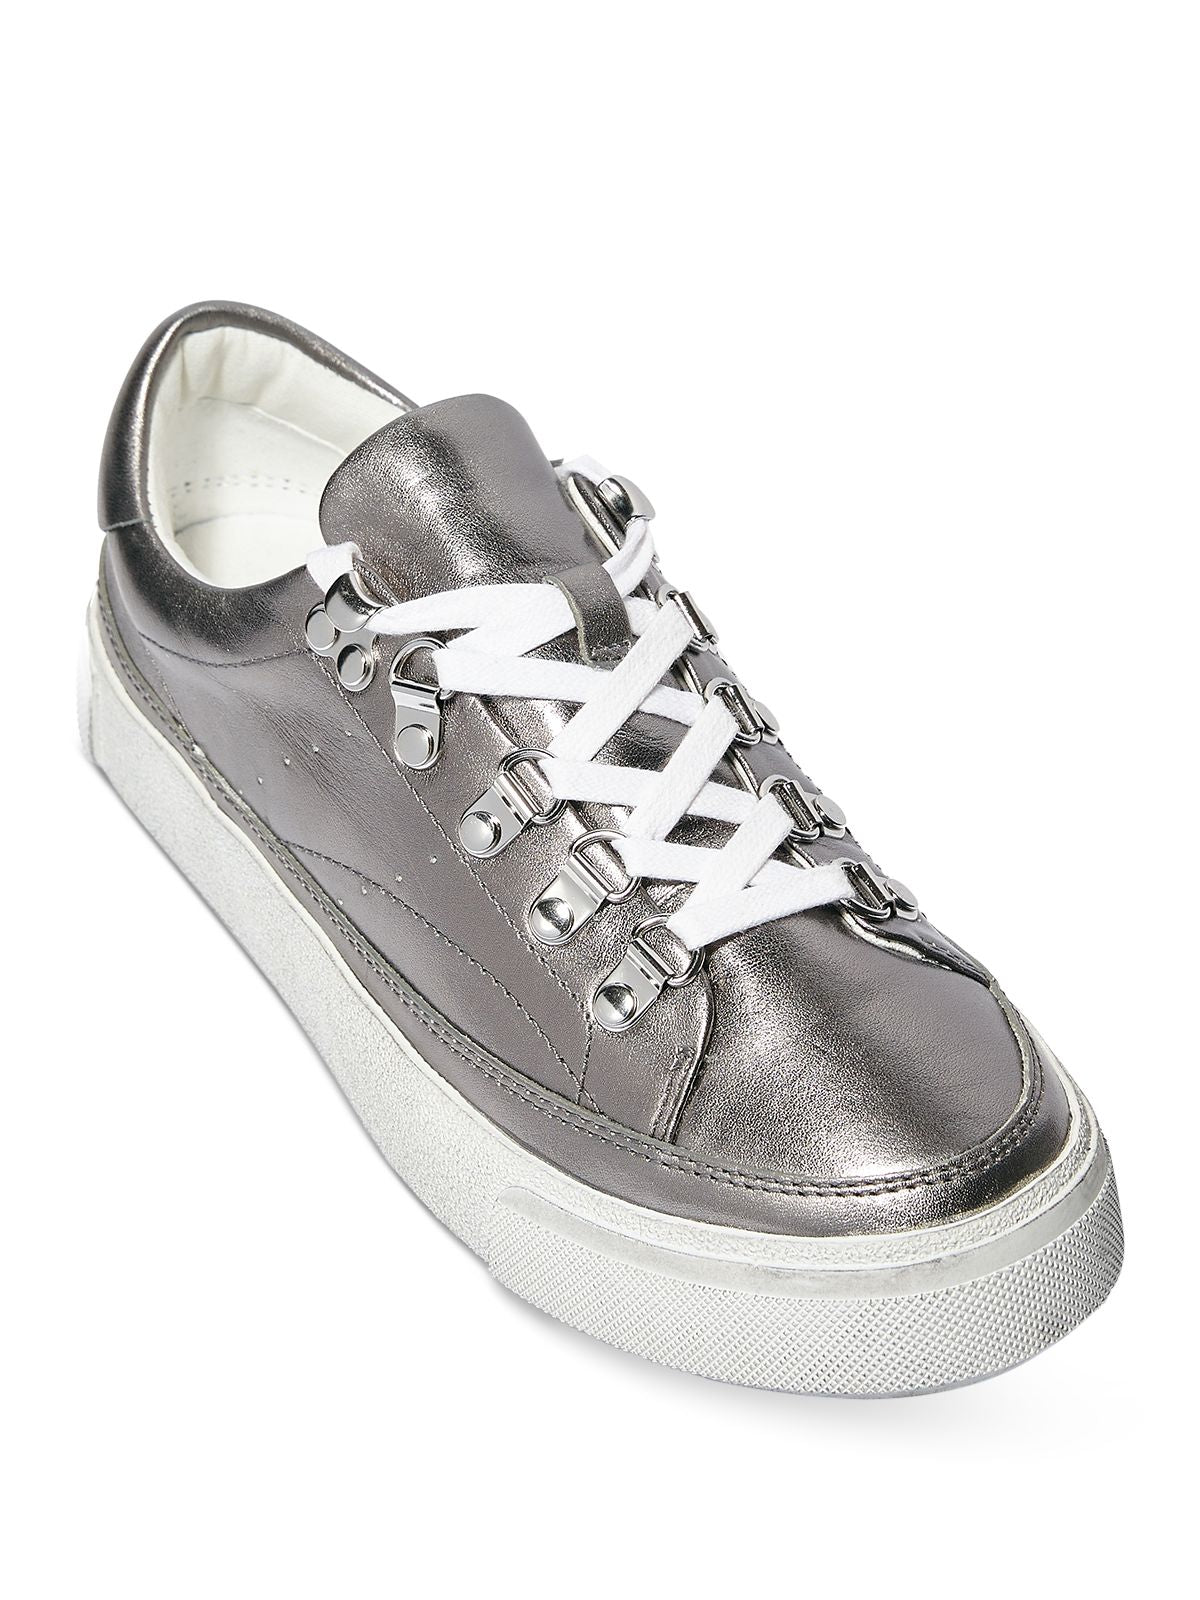 ALLSAINTS Womens Silver Padded Collar Breathable Metallic Quinn Round Toe Platform Lace-Up Leather Athletic Sneakers Shoes 41